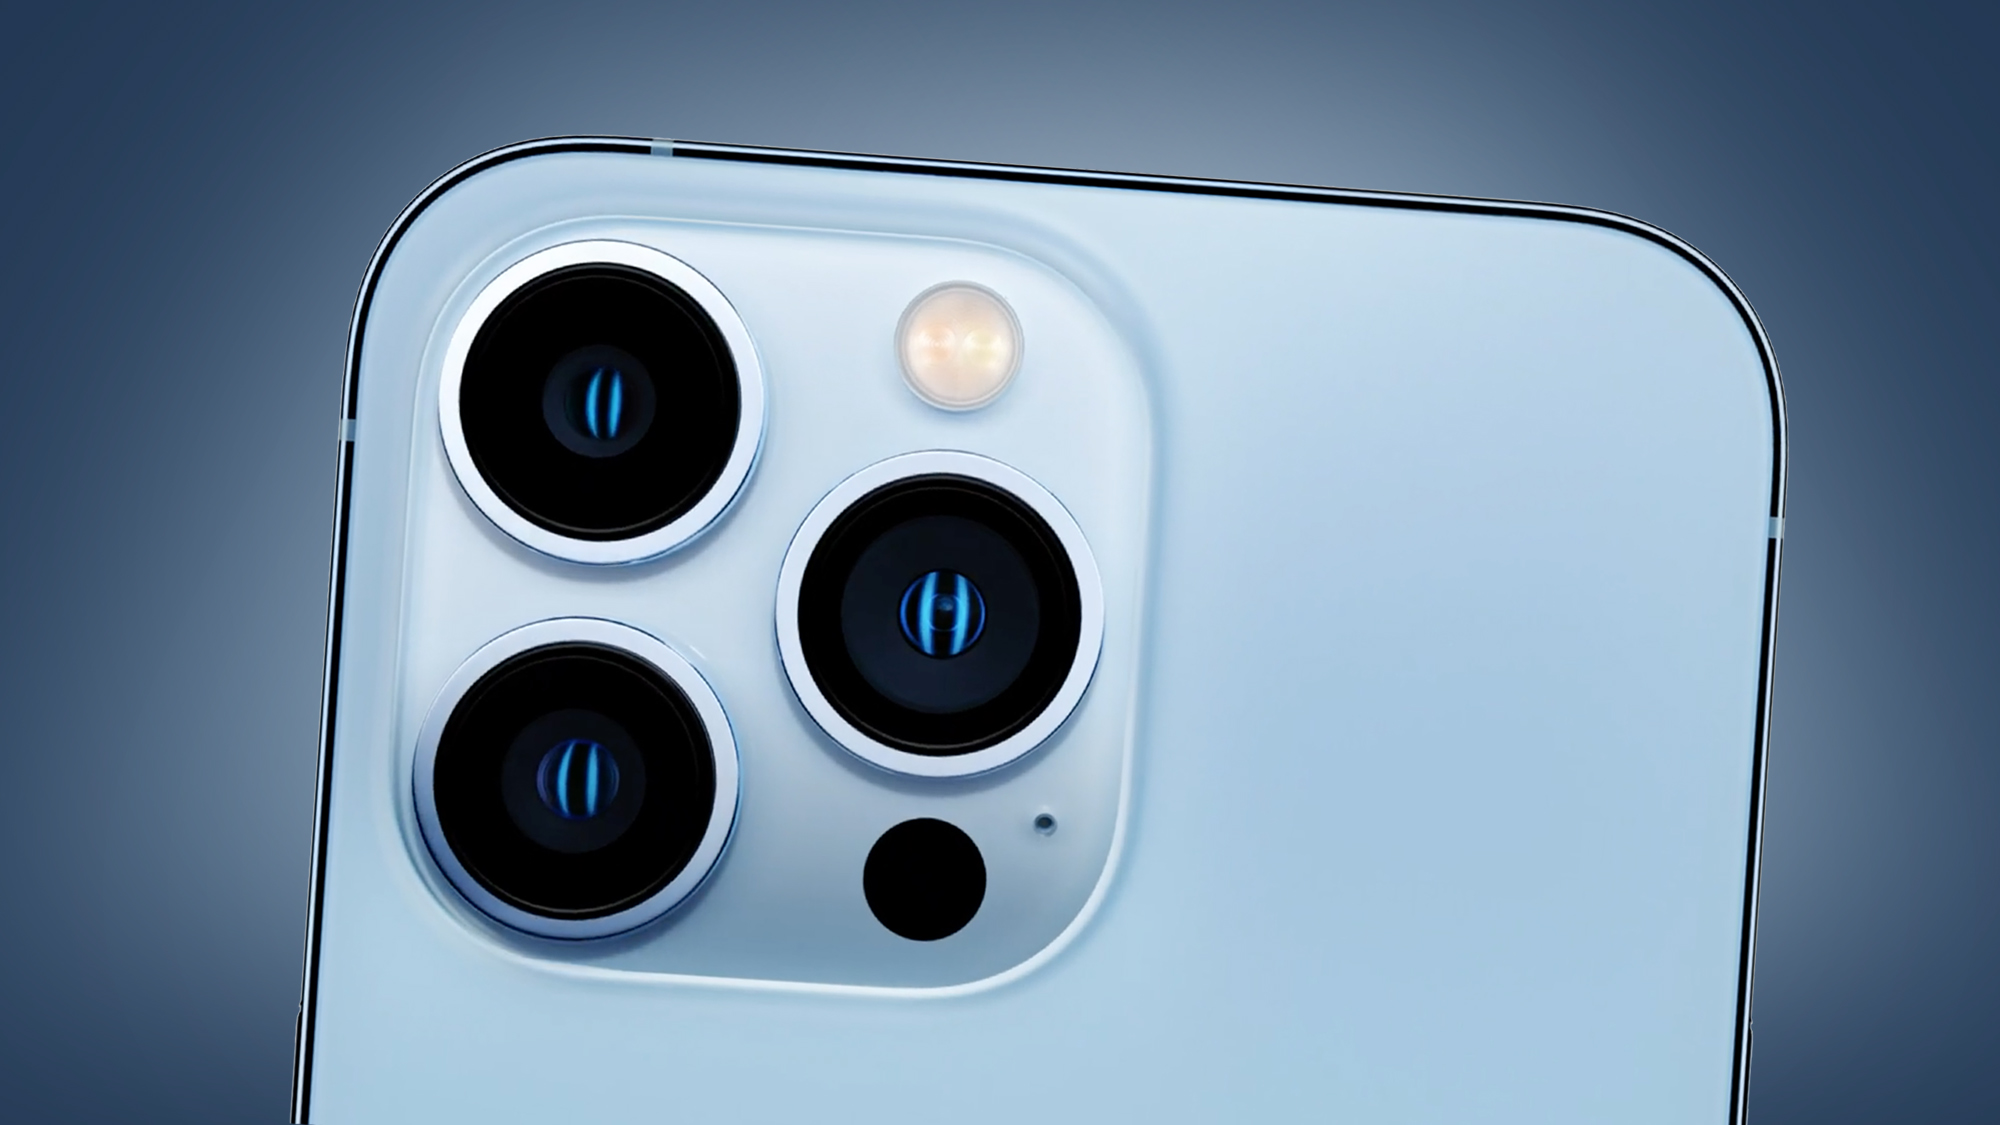 The rear cameras of the iPhone 13 Pro